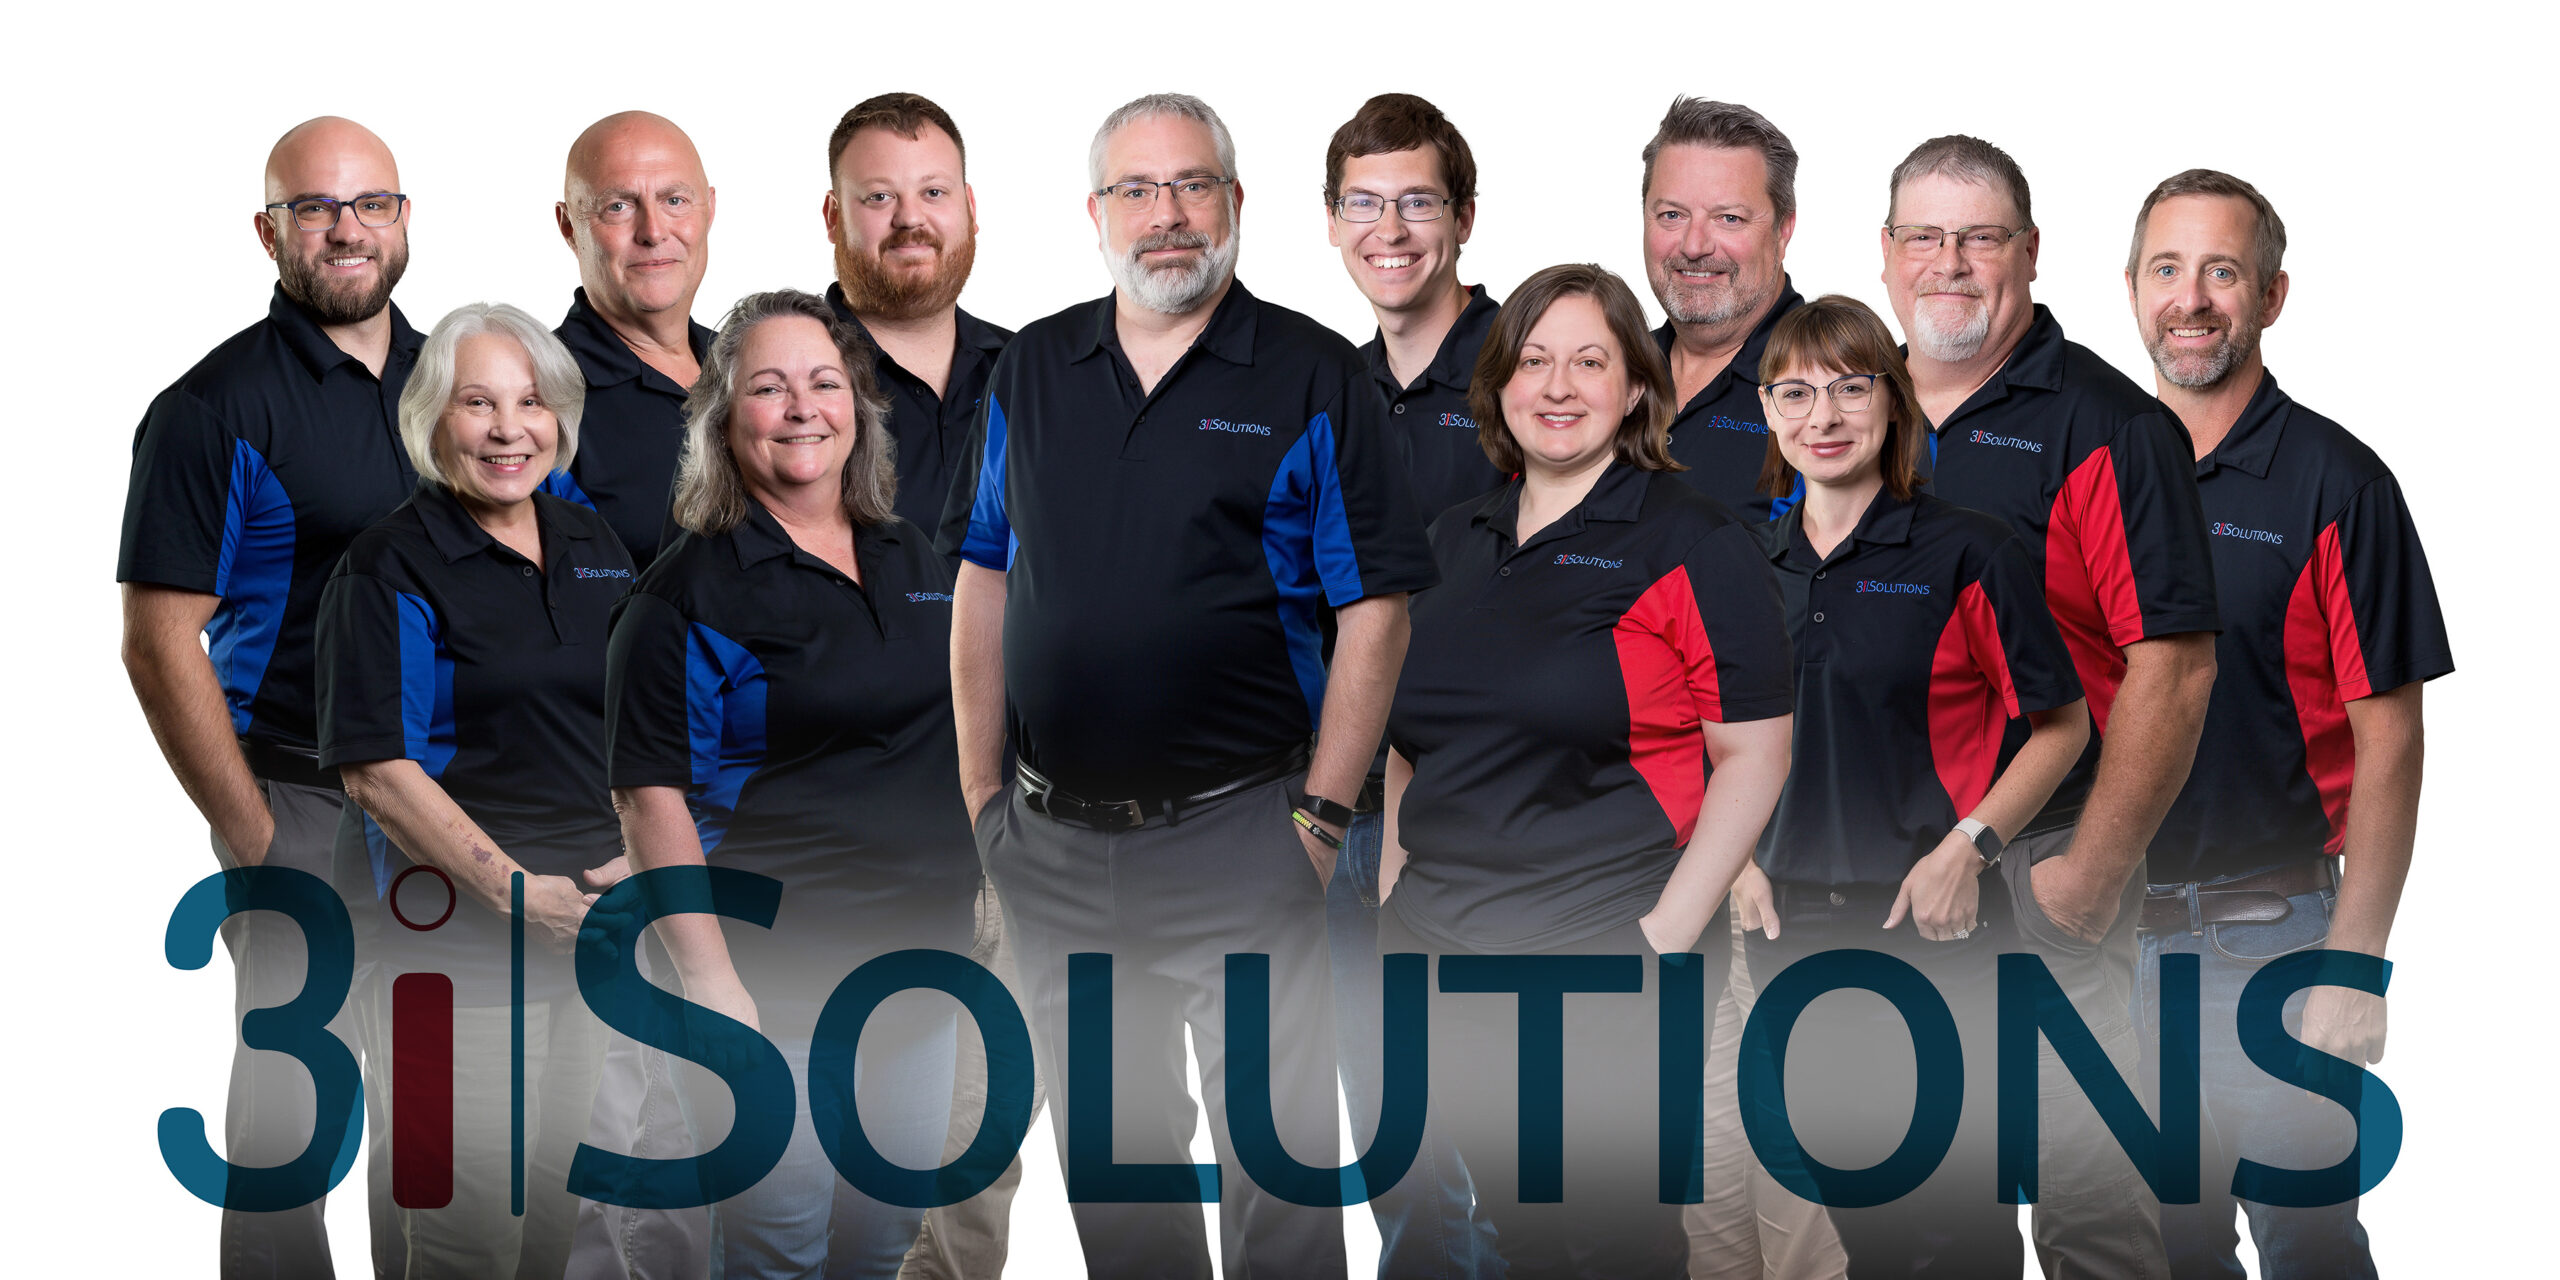 Group photo of 3i Solutions team